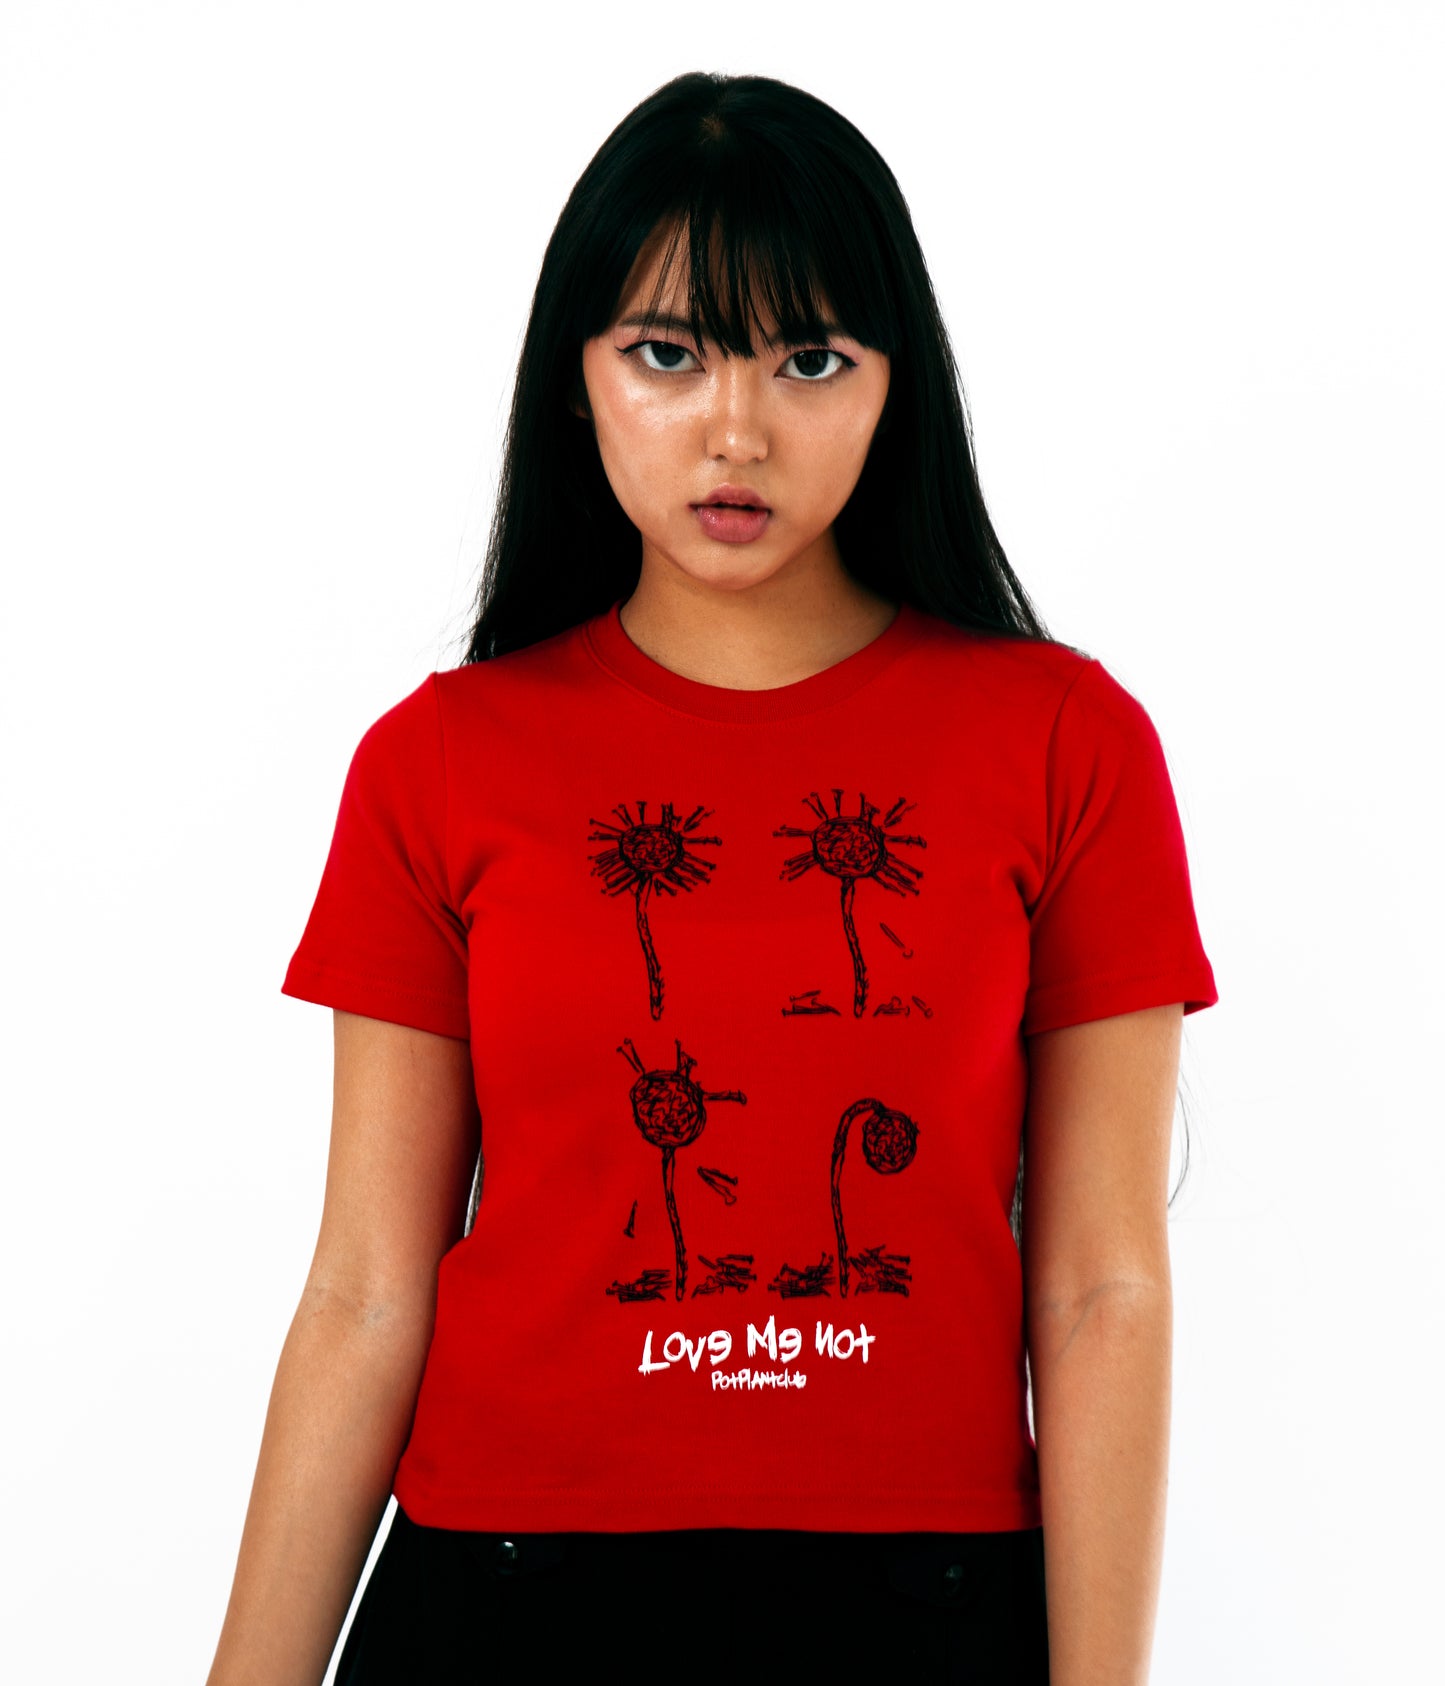 Pot Plant Club "Love Me Not" Baby T-shirt - Red